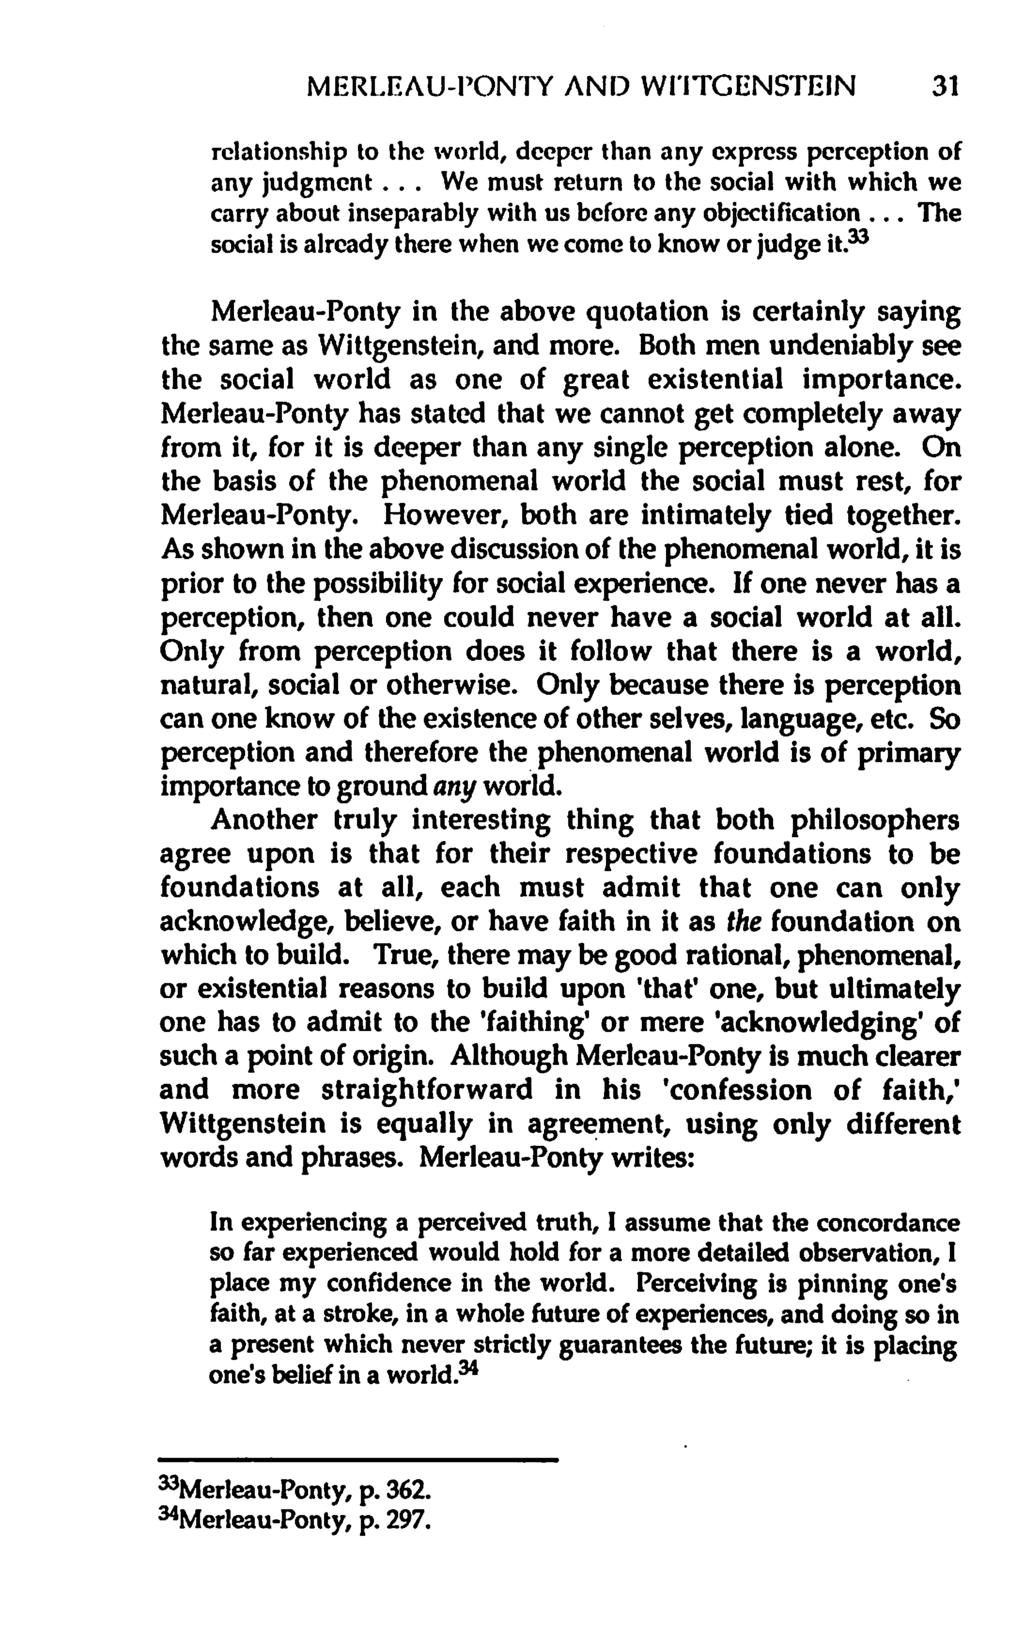 MERLEAU-PONTY AND WHTCENSTEIN 31 relationship to the world, deeper than any express perception of any judgment.